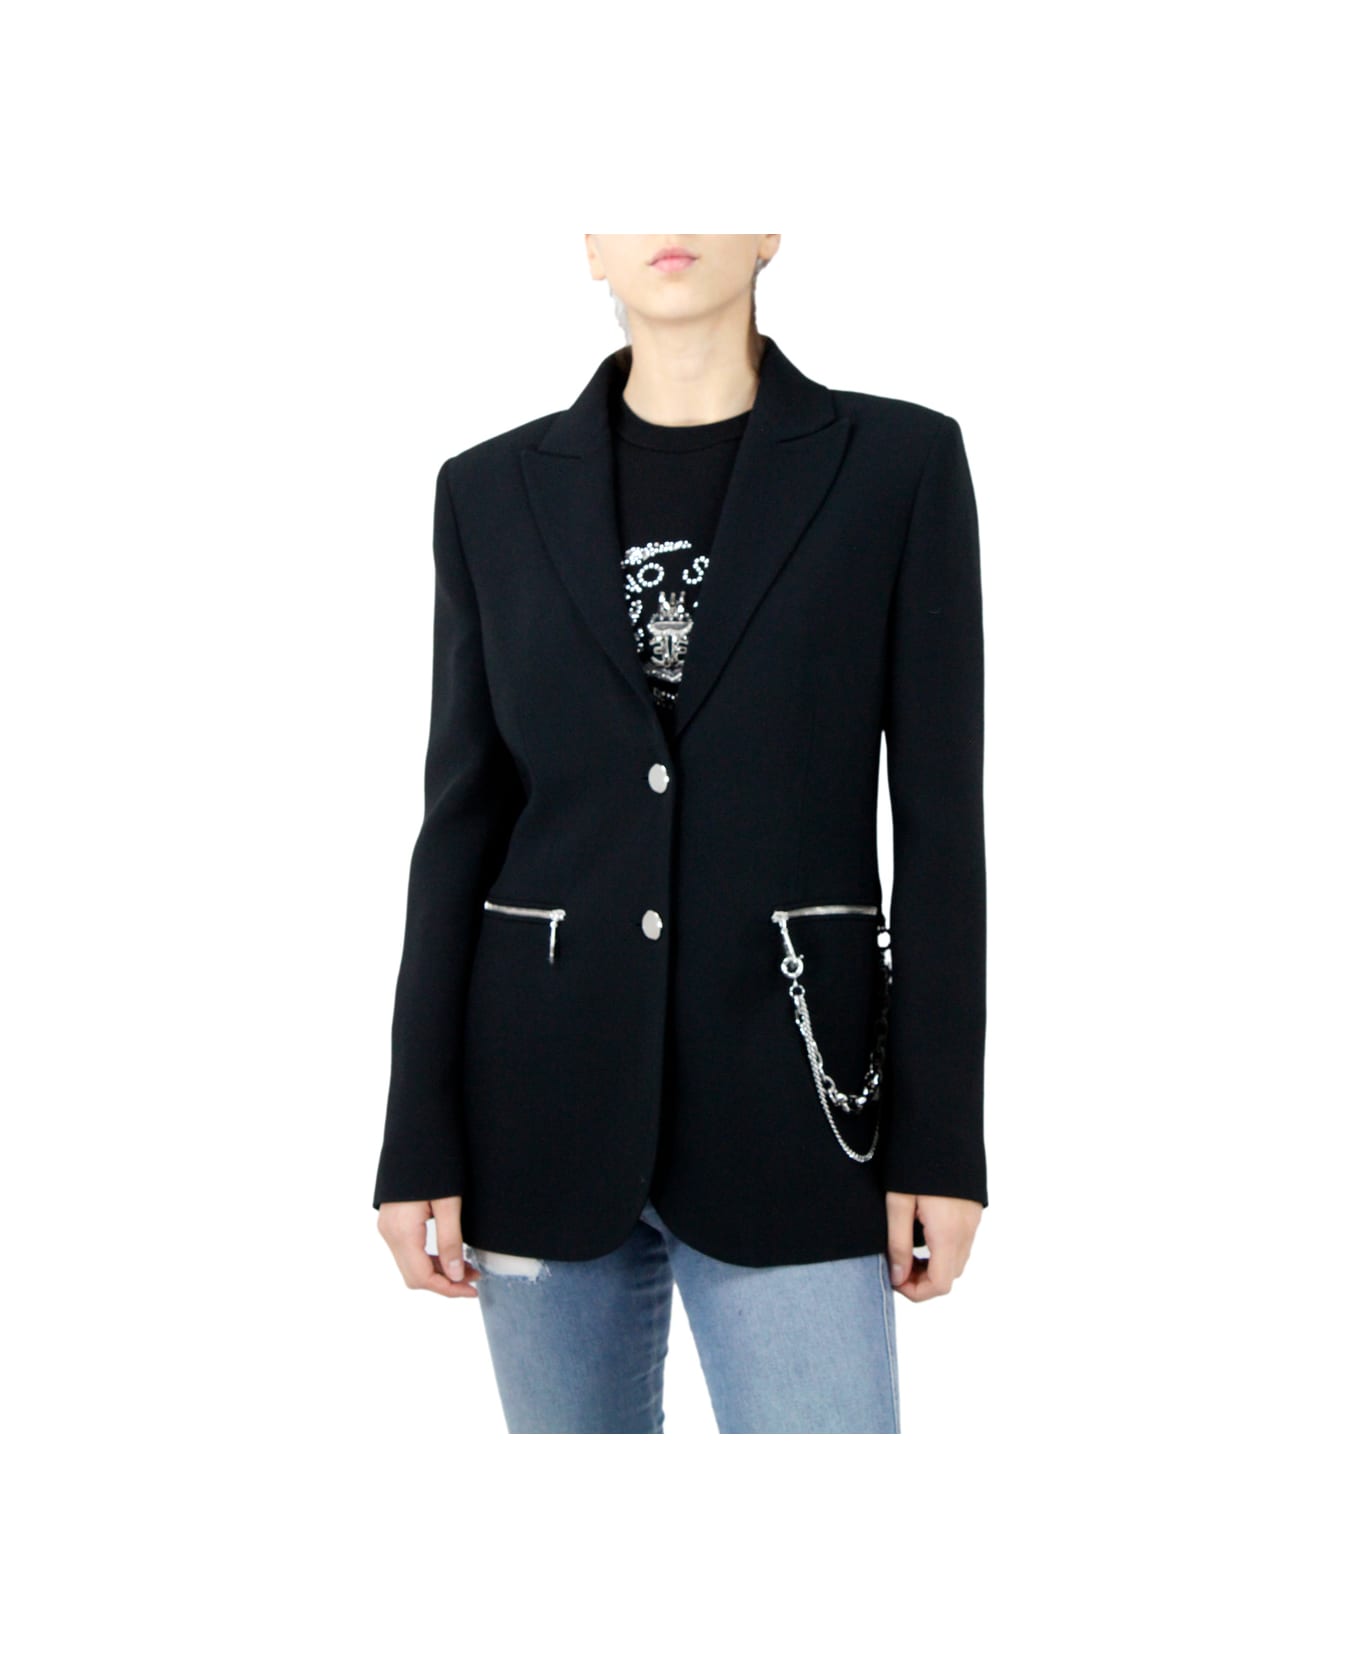 Ermanno Scervino Single-breasted Jacket Made Of Soft Stretch Viscose, Two-button Closure, Zip Pockets And Chain On The Pocket - Black